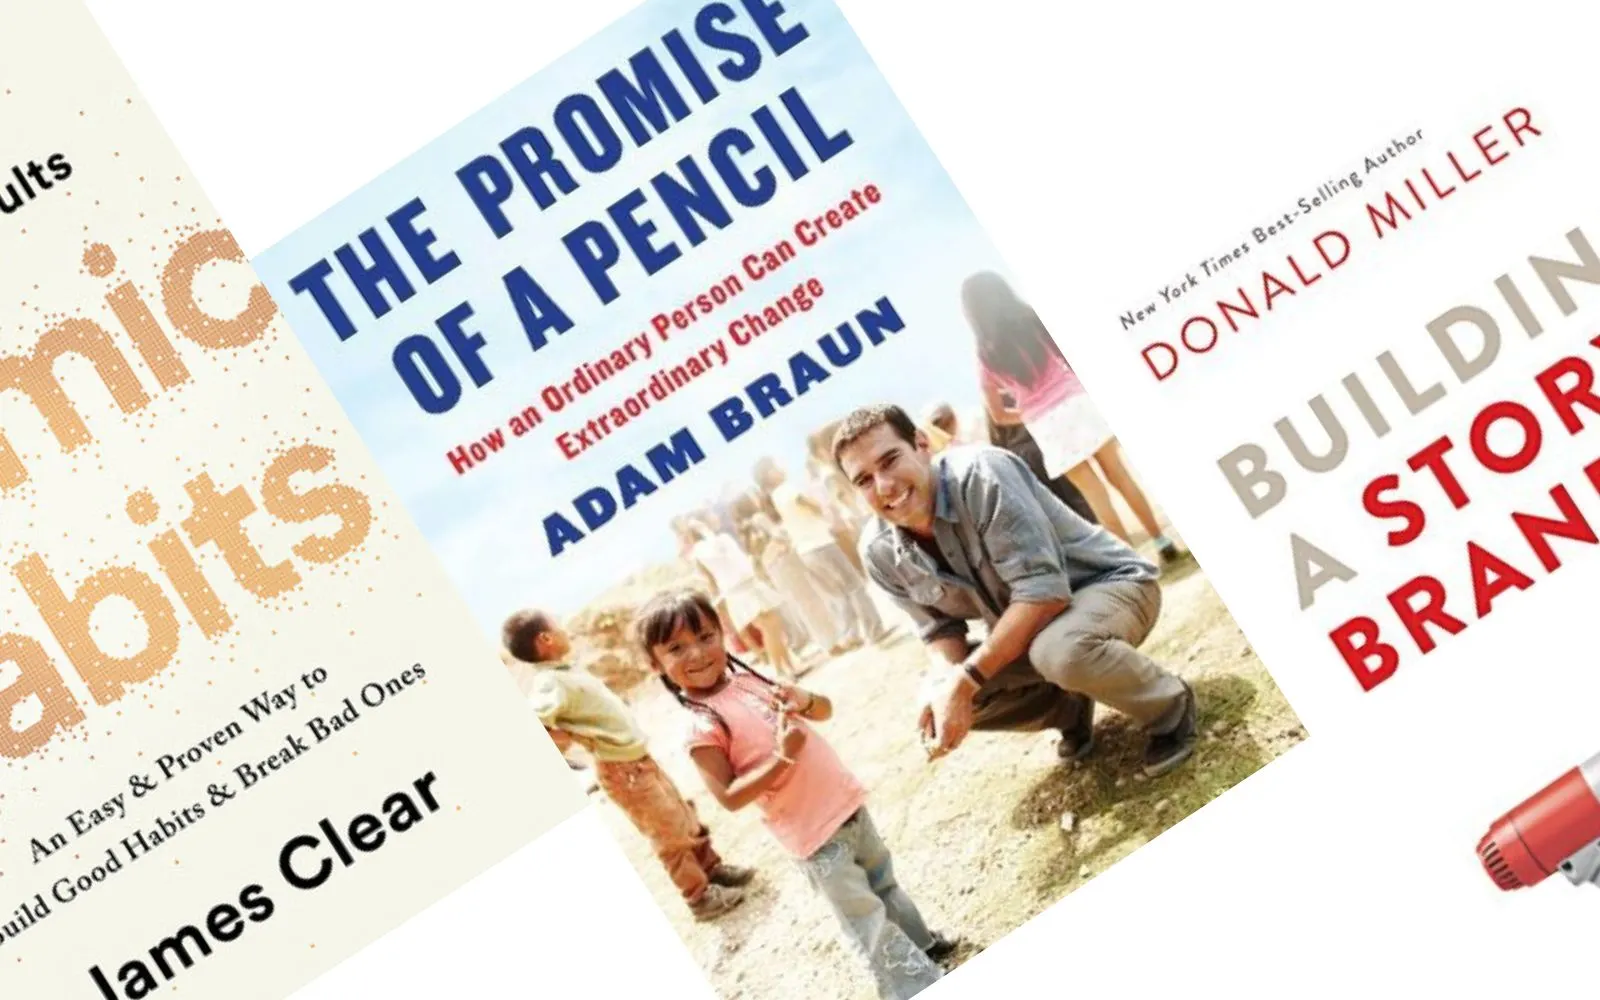 3 tilted books for entreprenueurs with The Promise of a Pencil in the middle